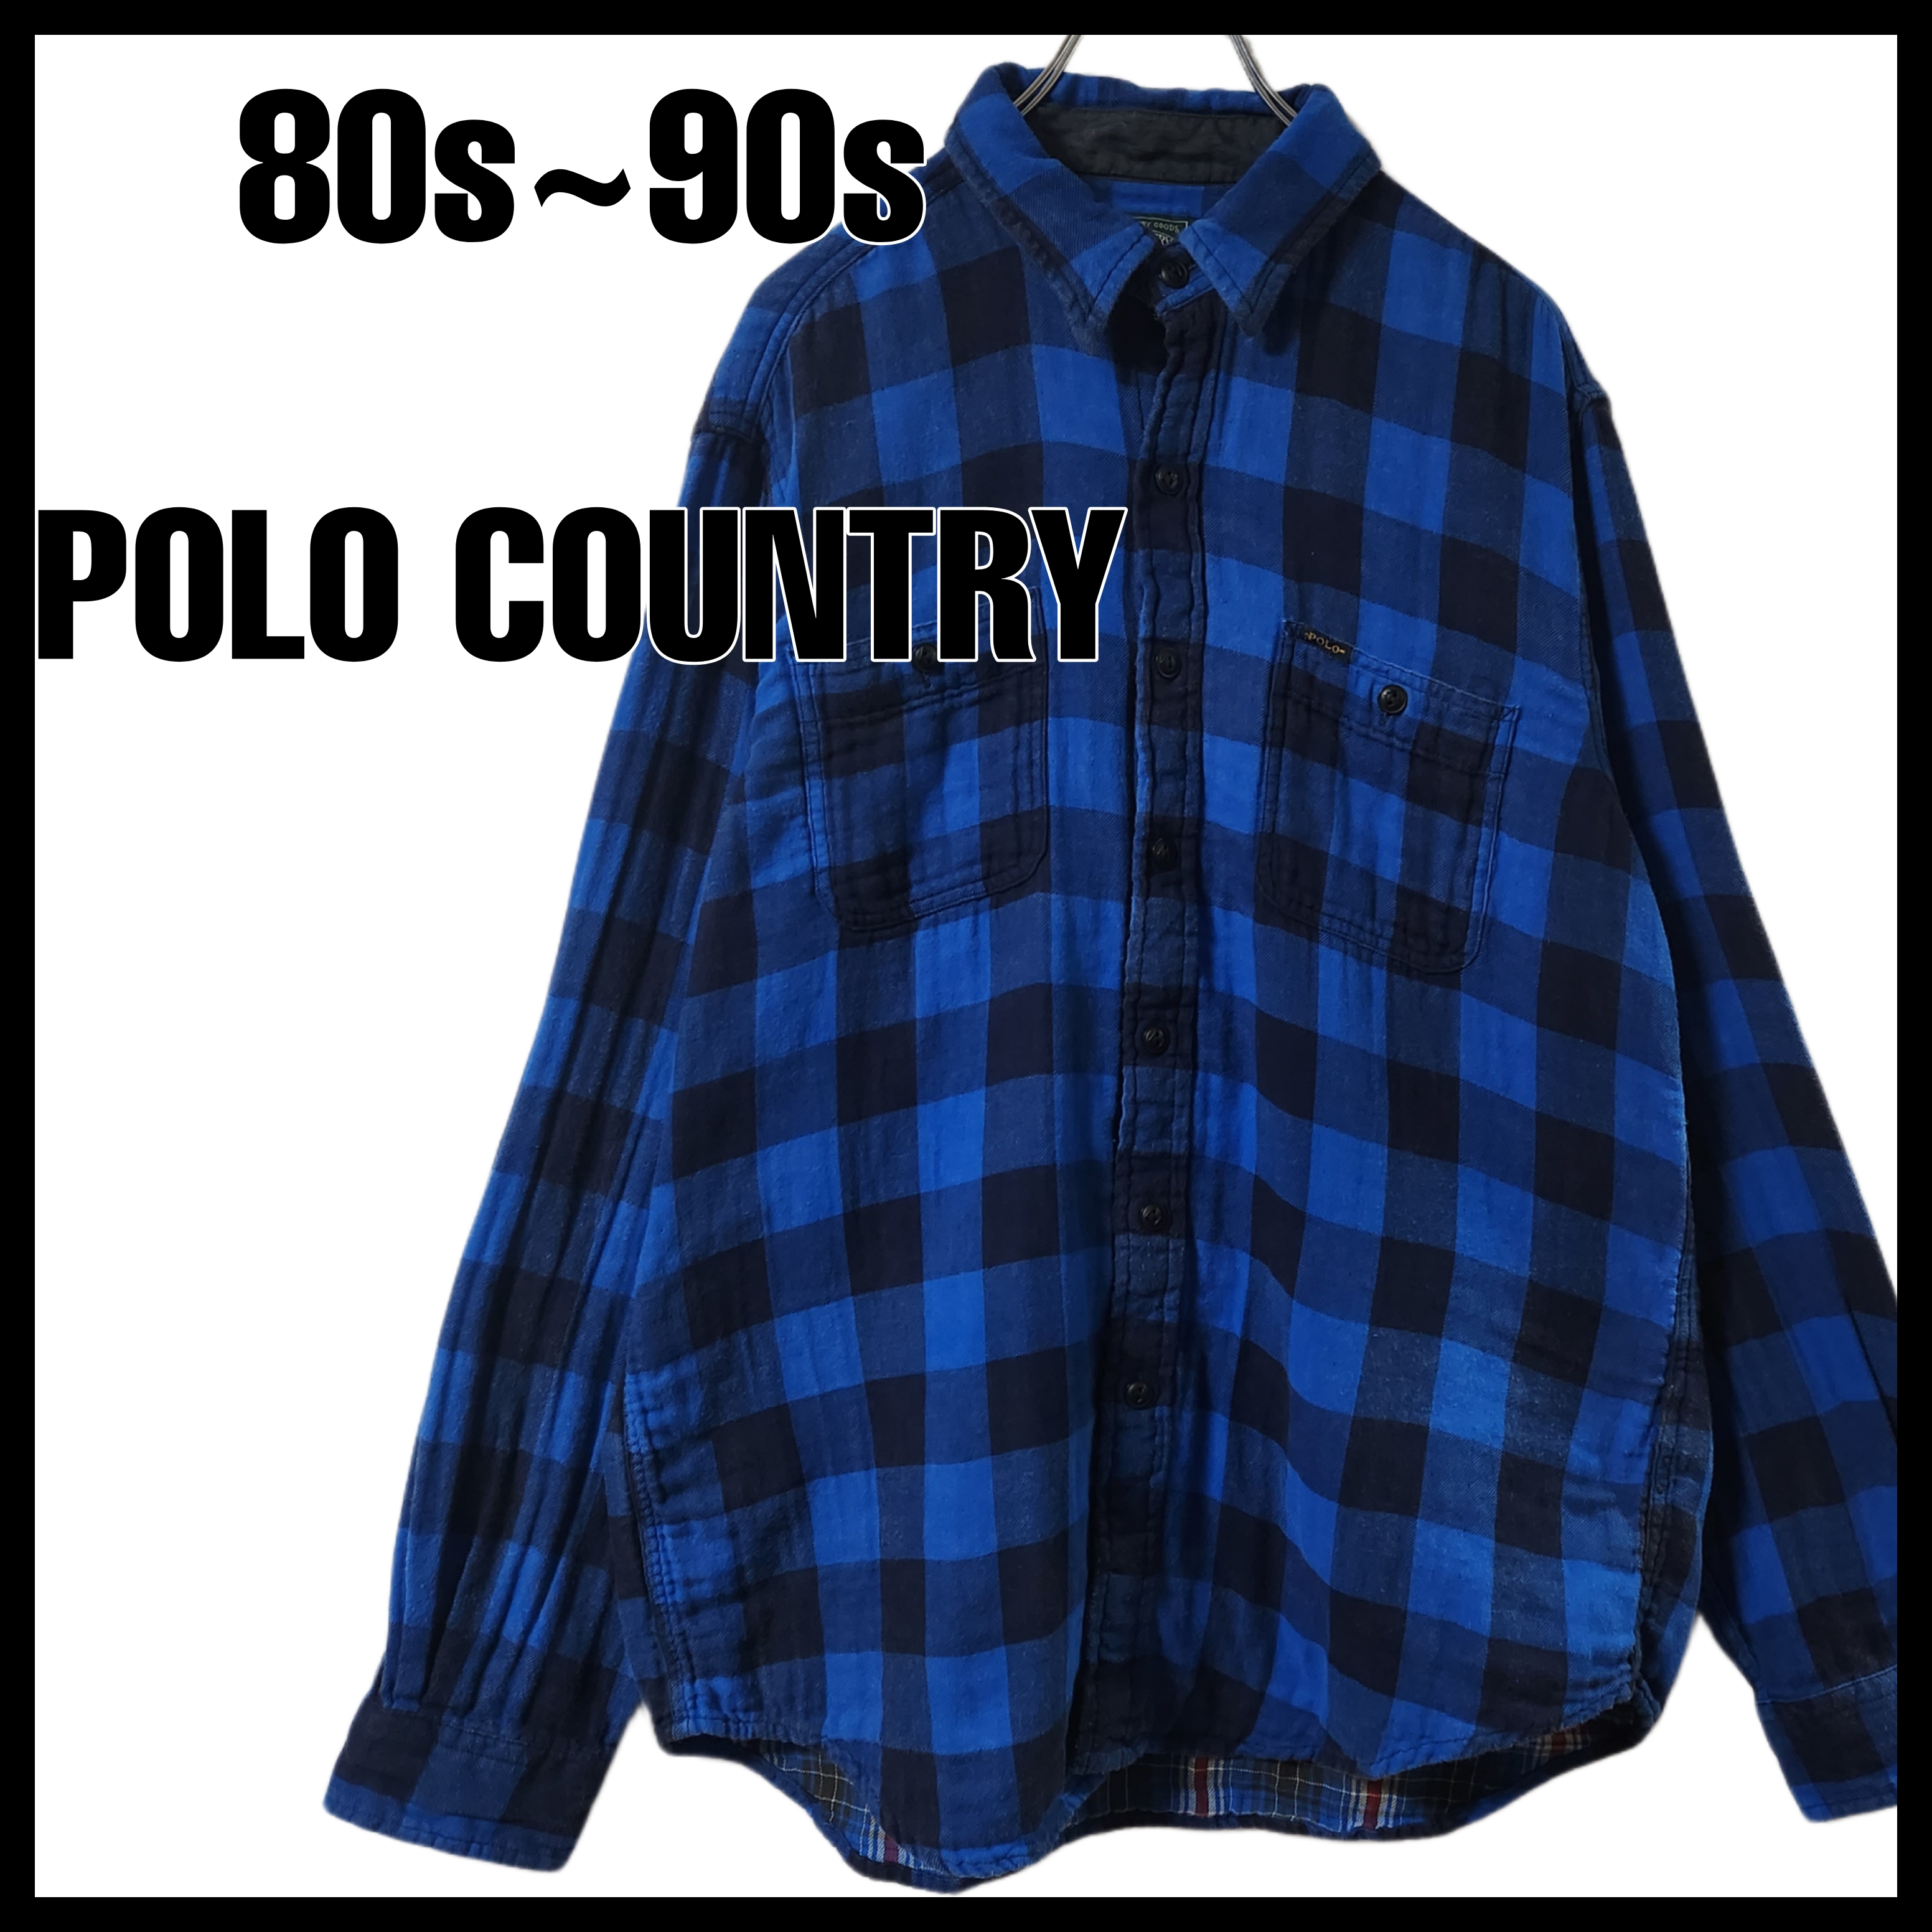 2022SUMMER/AUTUMN新作 80s-90s POLO COUNTRY チェックシャツ - 通販 -  www.stekautomotive.com